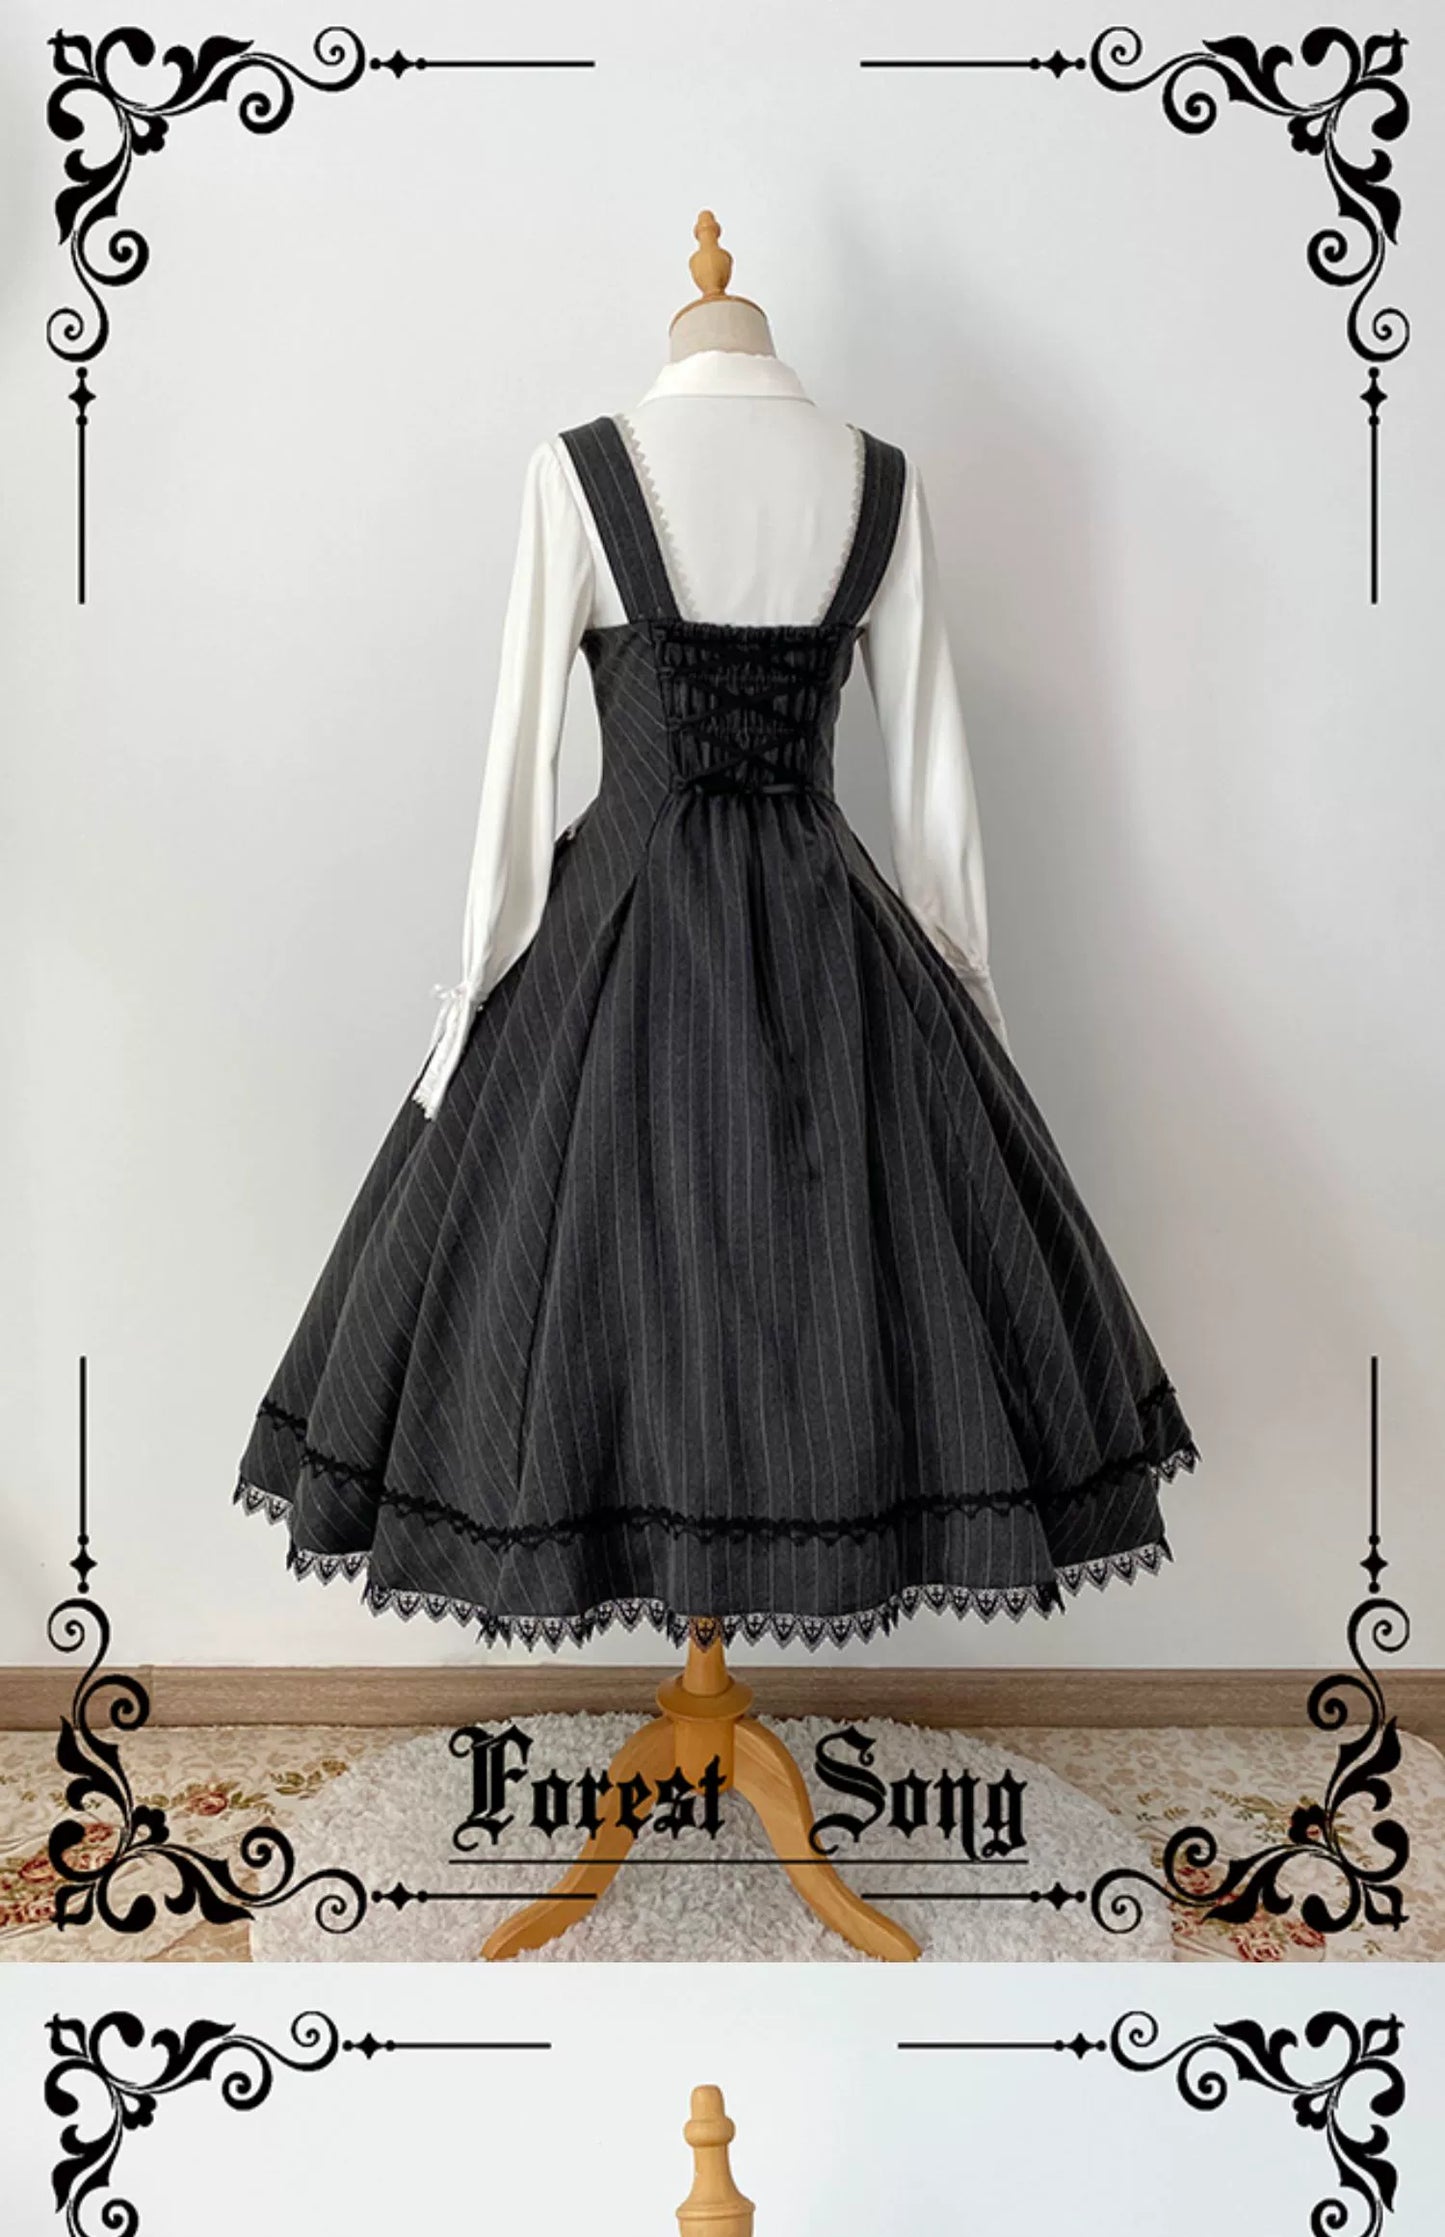 [Sales period ended] Symphony of Angels Classical Jumper Skirt